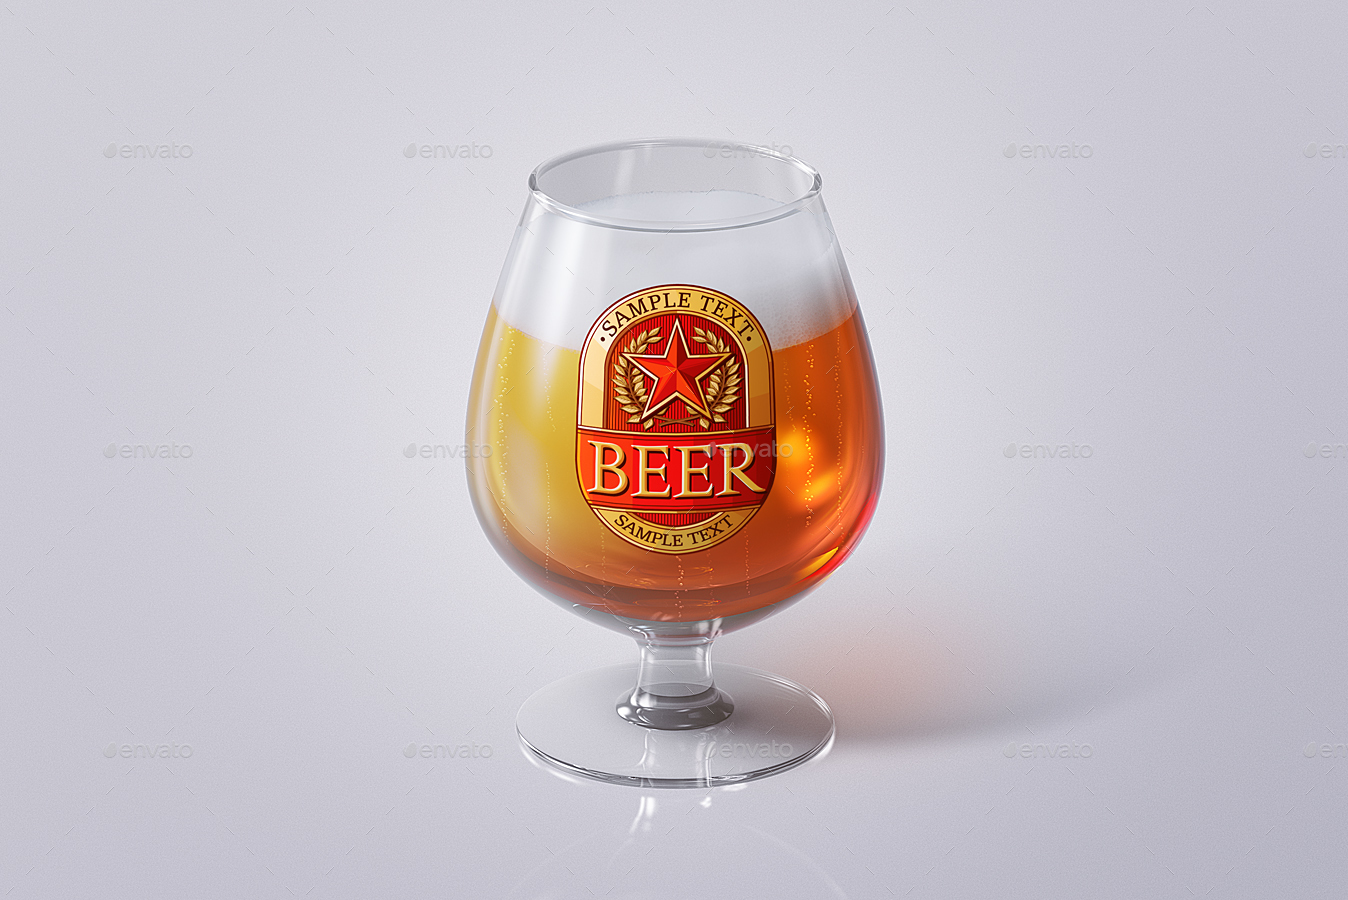 Download Mockup Beer Glass Free / Beer glass and bottle with label mockup | Free PSD File : Today's ...